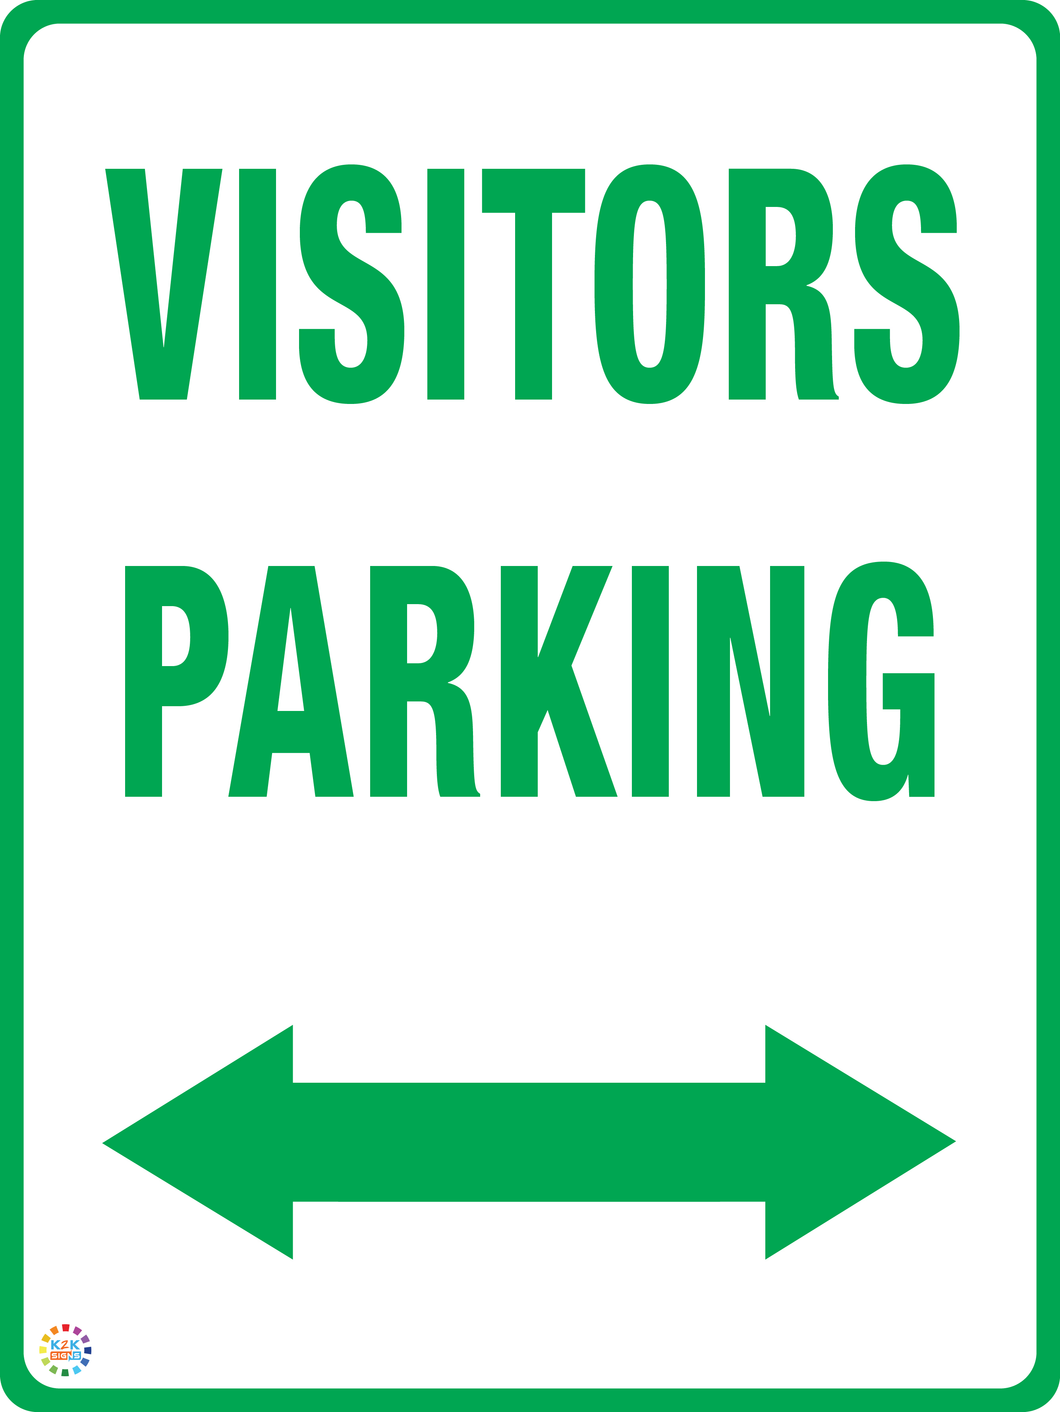 Visitors Parking (Two Way Arrow) Sign